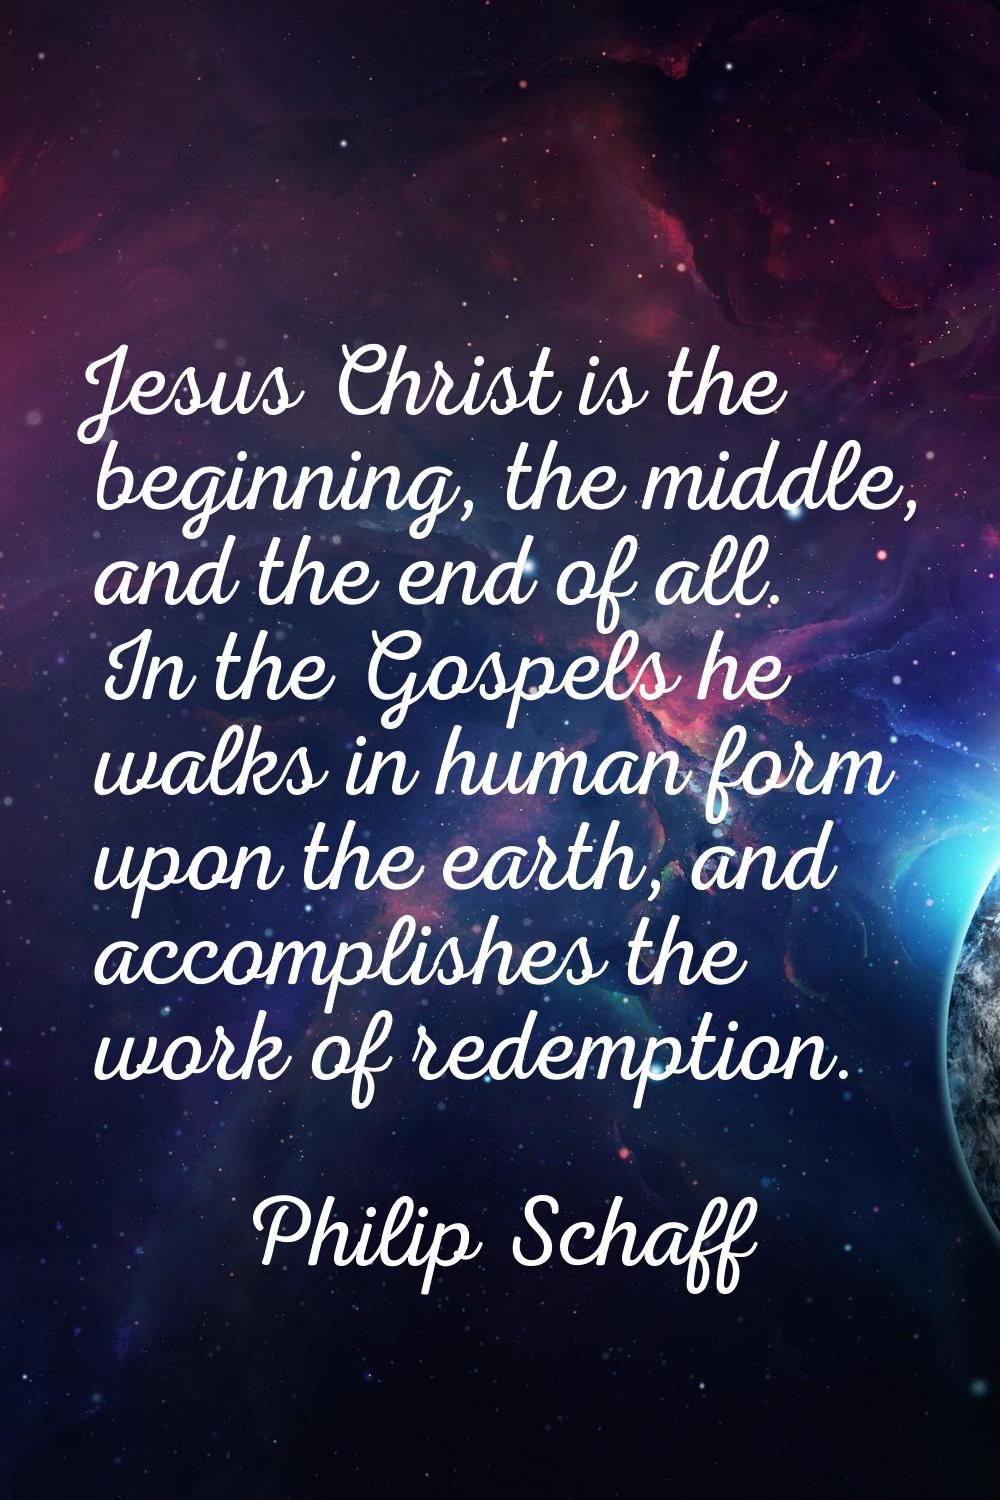 Jesus Christ is the beginning, the middle, and the end of all. In the Gospels he walks in human for